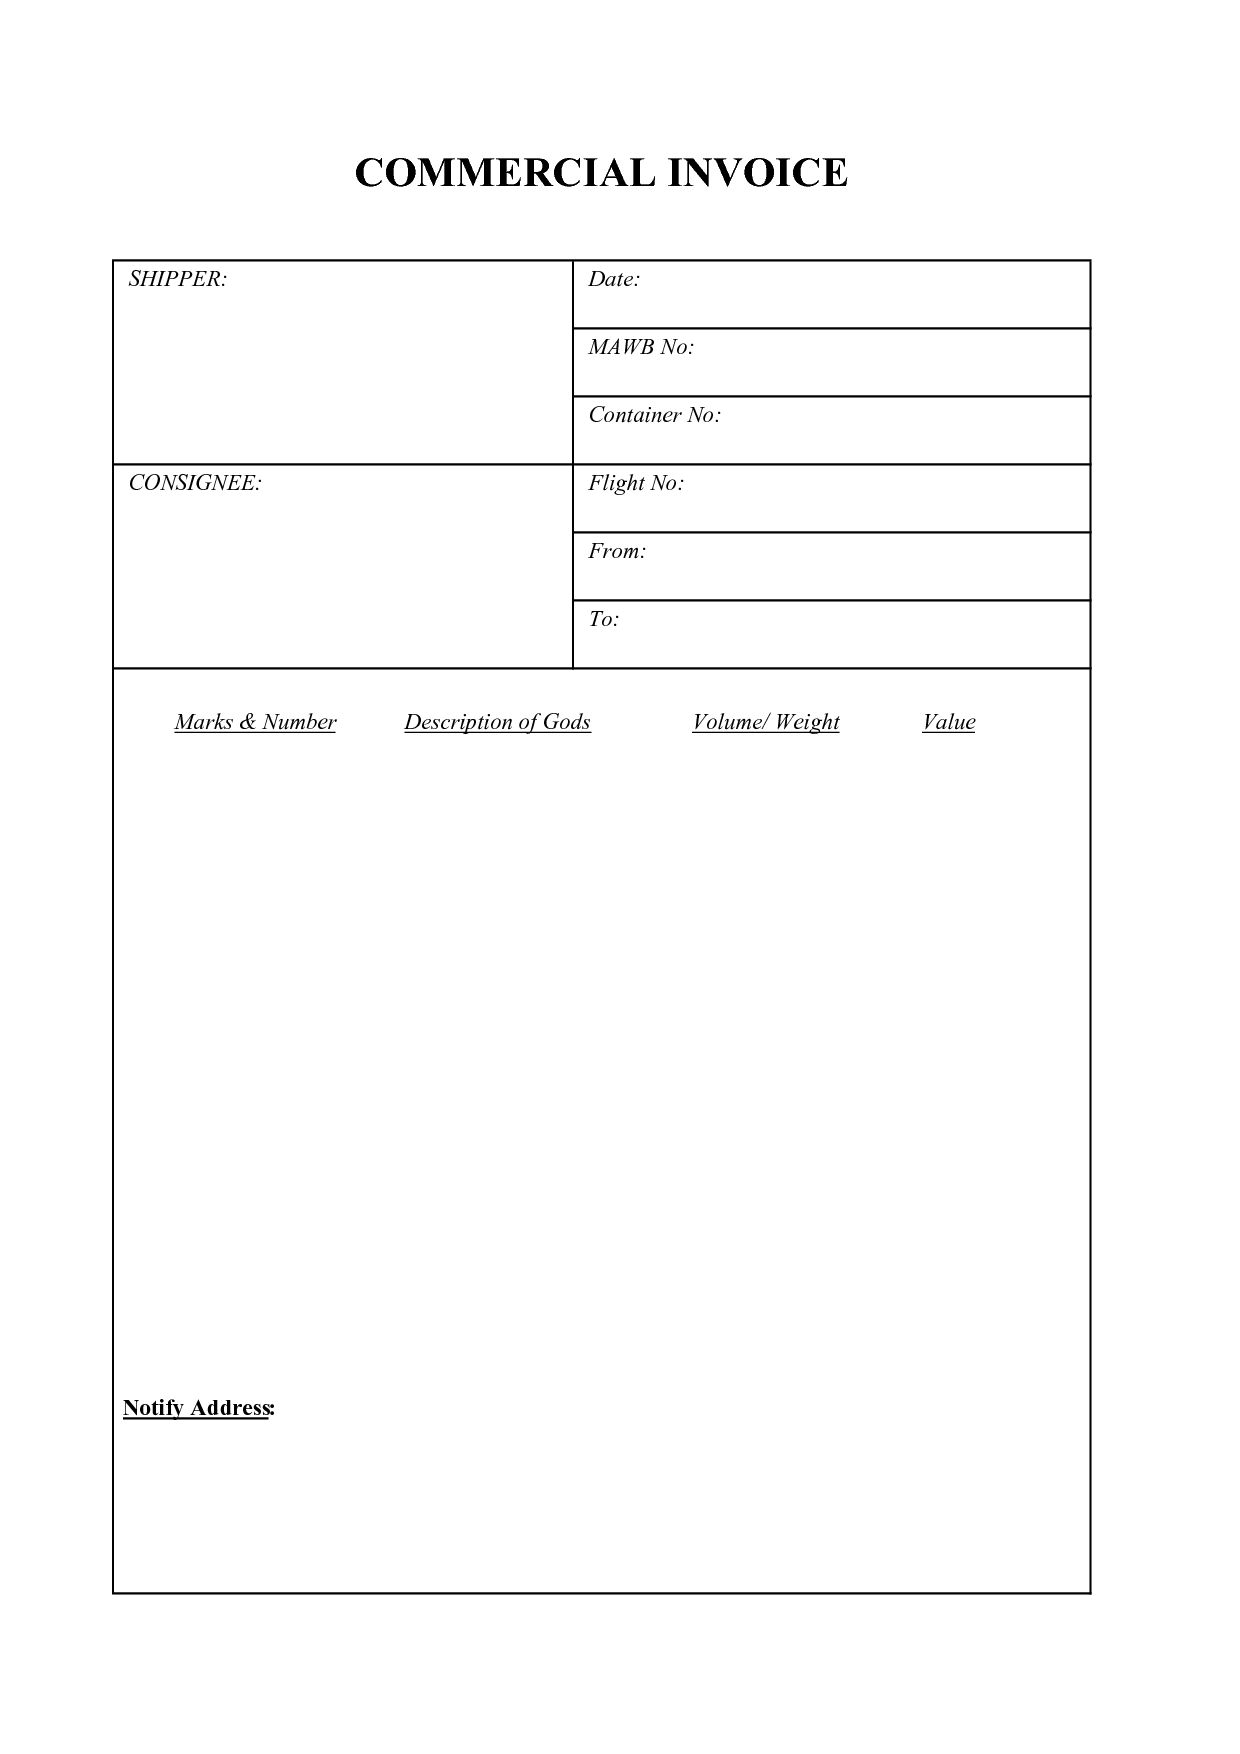 tnt commercial invoice template uk invoice template 2017 tnt commercial invoice